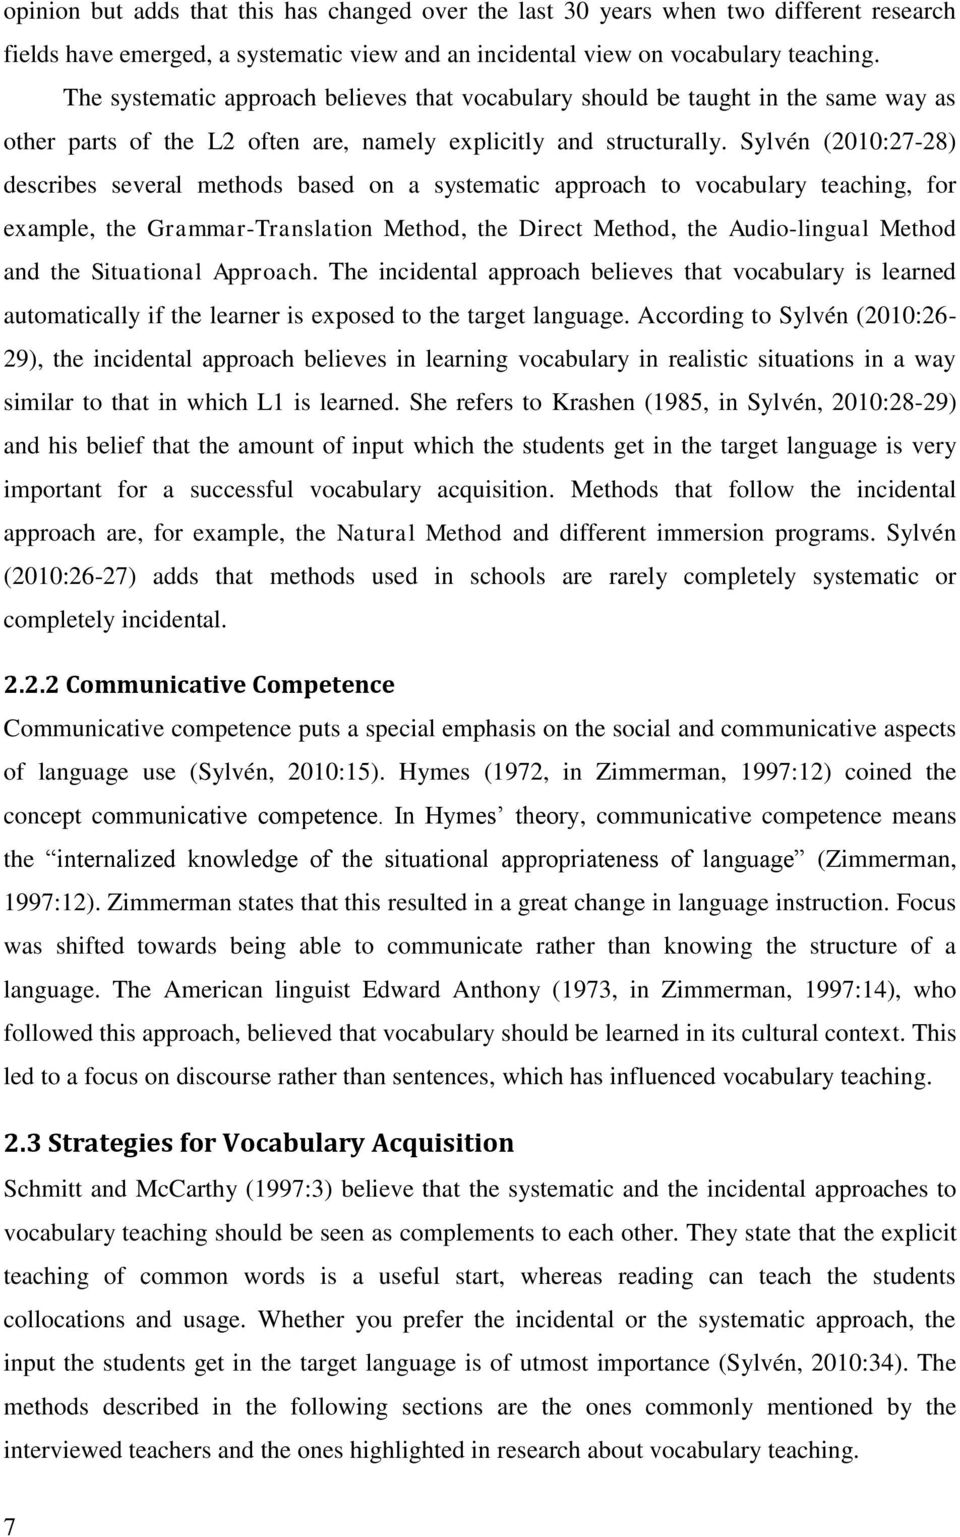 Sylvén (2010:27-28) describes several methods based on a systematic approach to vocabulary teaching, for example, the Grammar-Translation Method, the Direct Method, the Audio-lingual Method and the